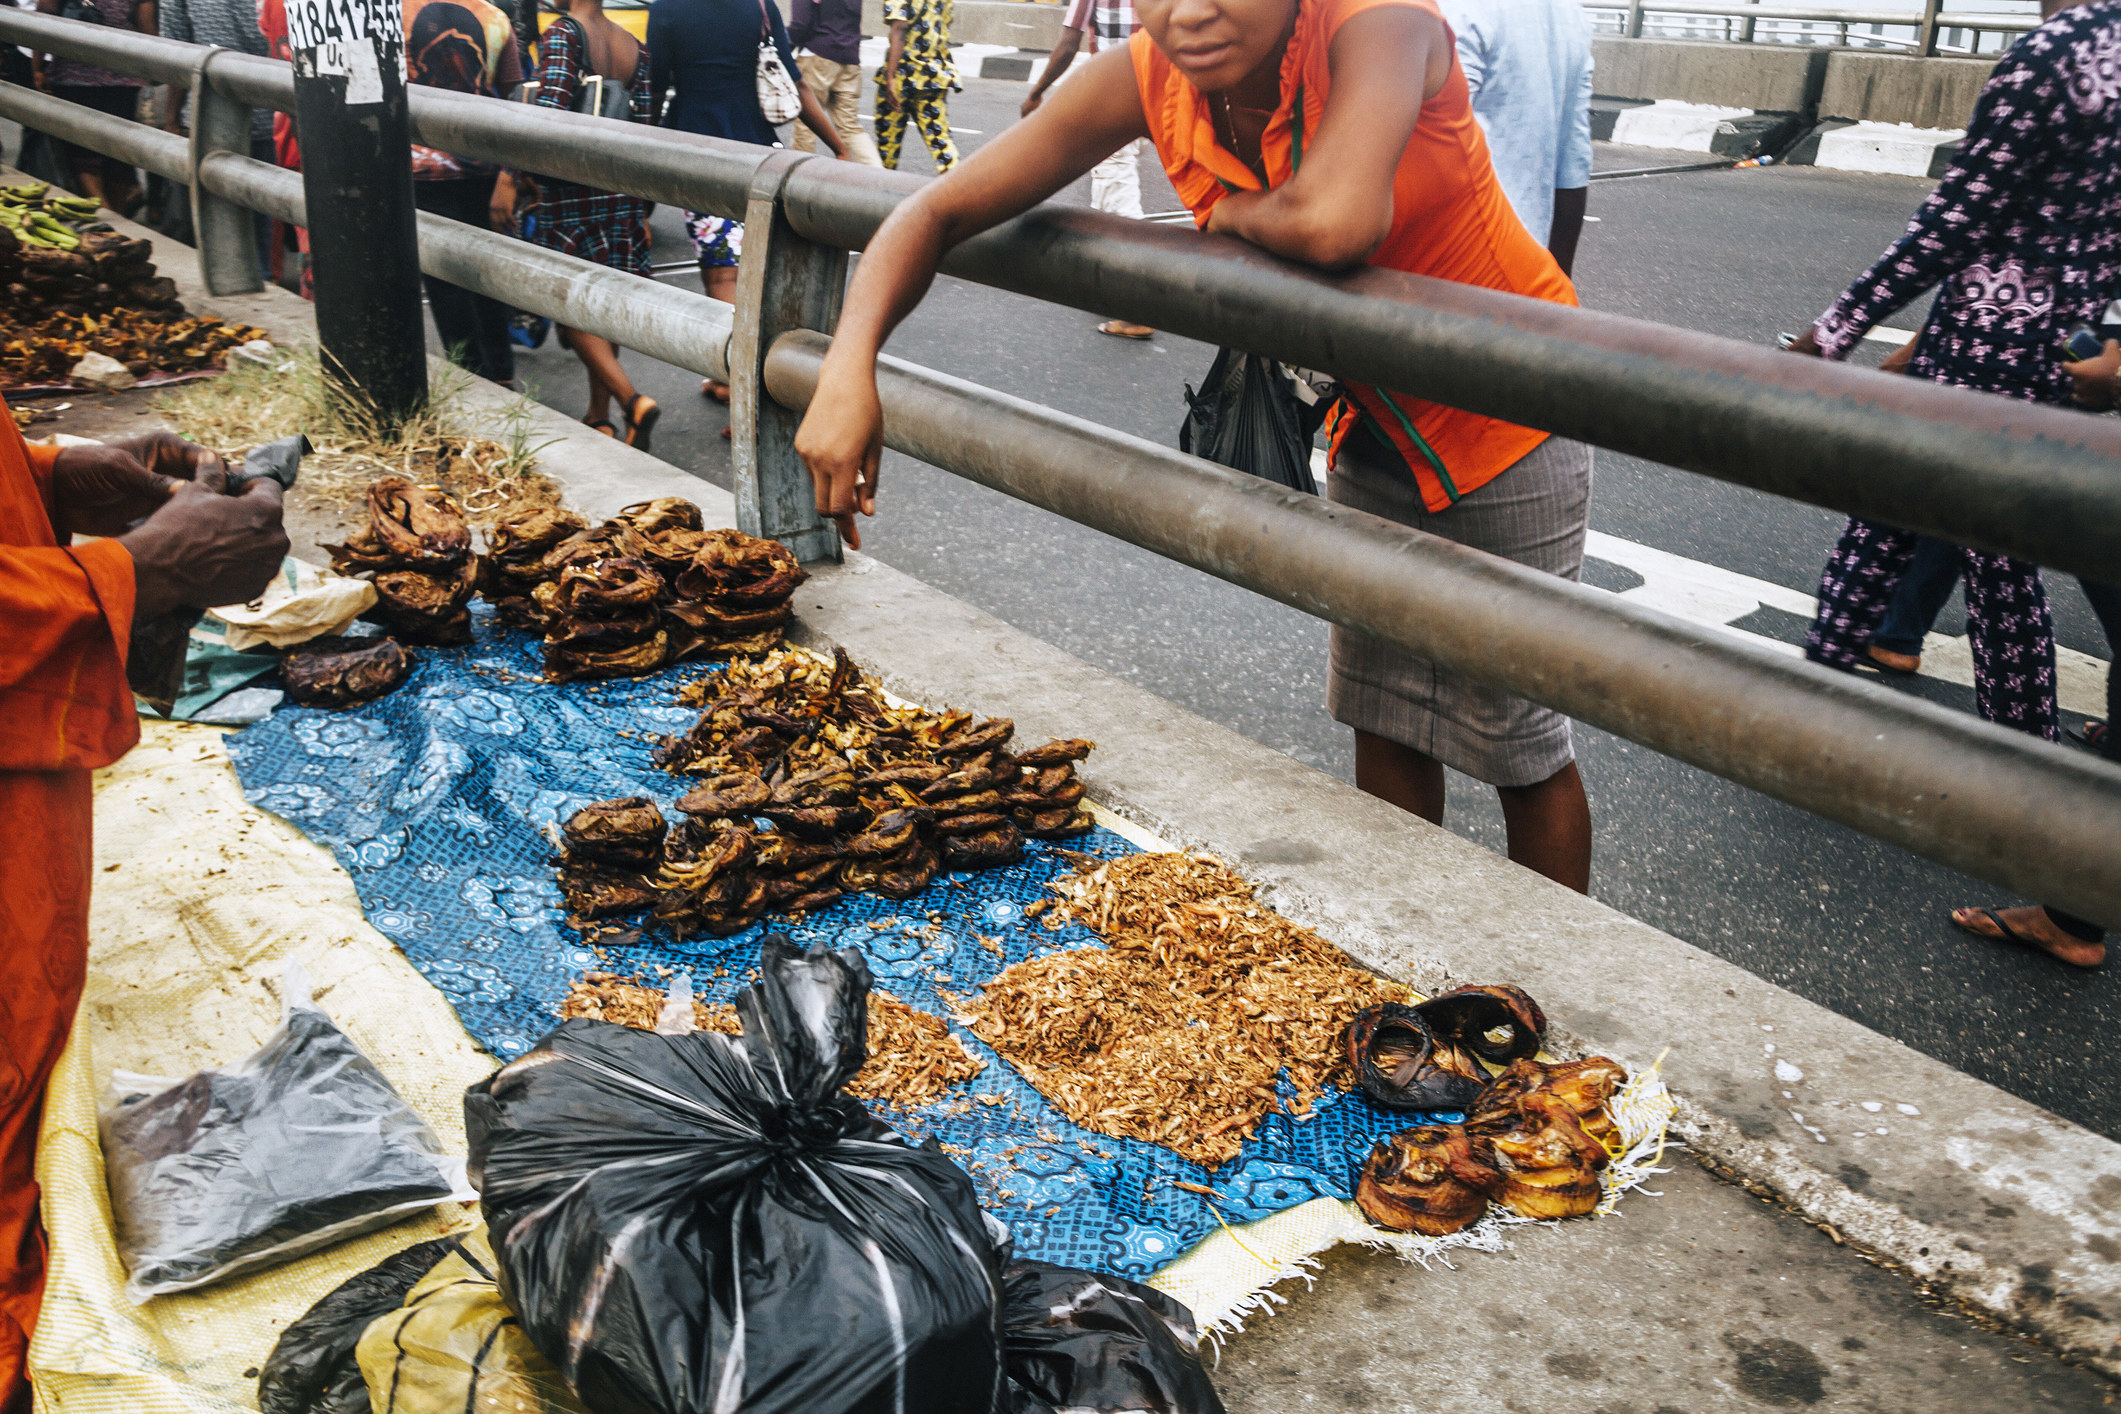 A boy selling food on the side of the road.